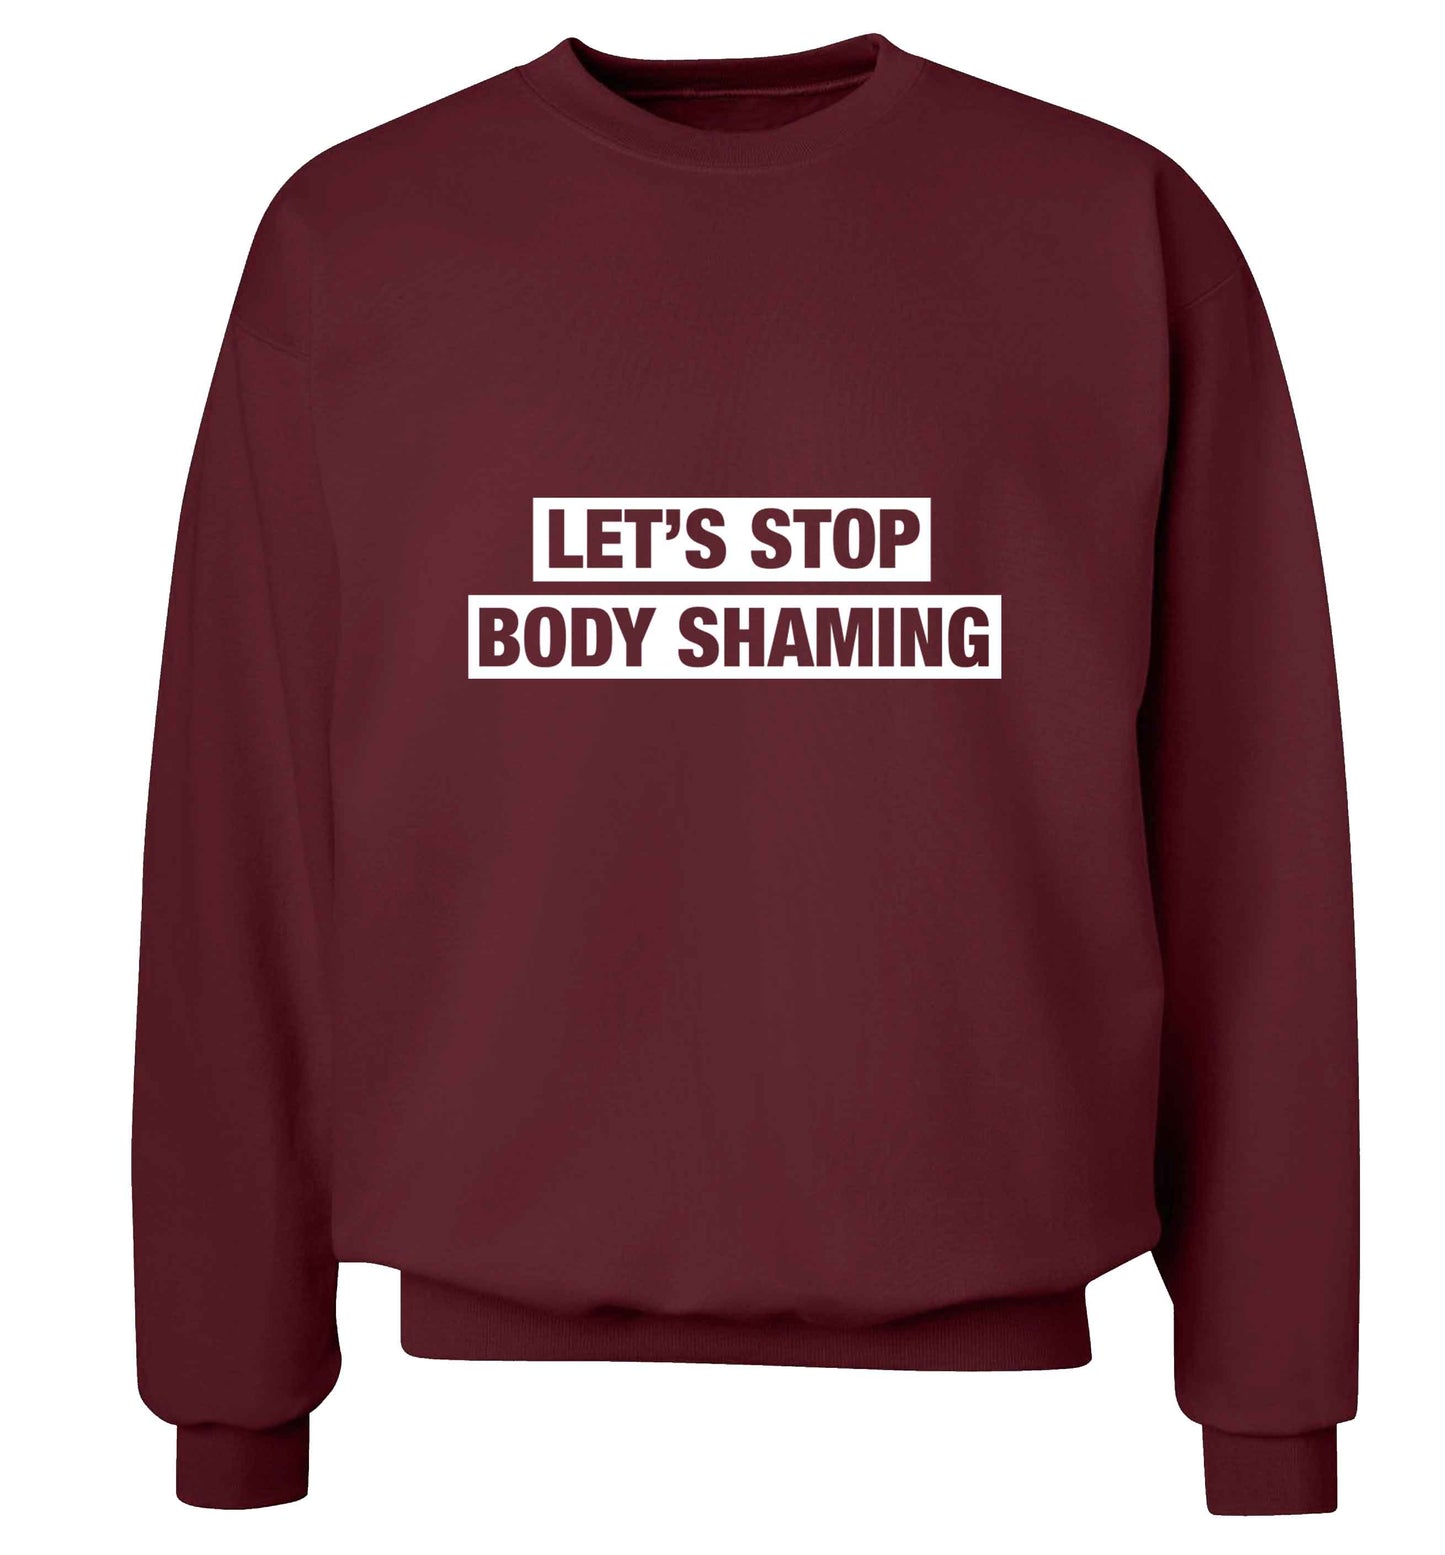 Let's stop body shaming adult's unisex maroon sweater 2XL